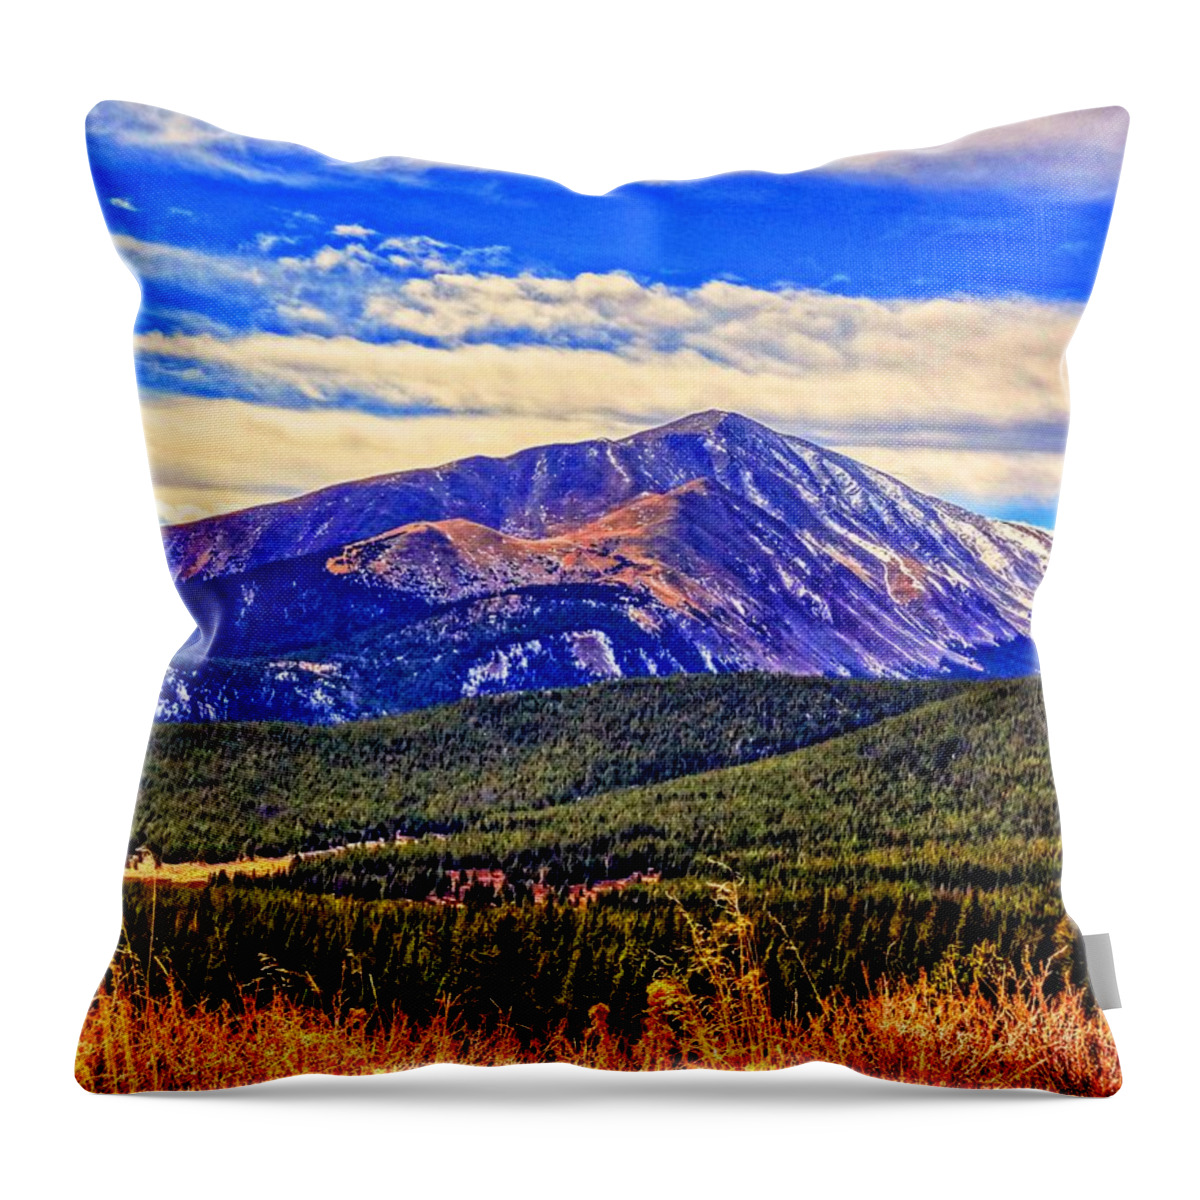 Mt. Silverhills Throw Pillow featuring the photograph Mt. Silverheels II by Lanita Williams